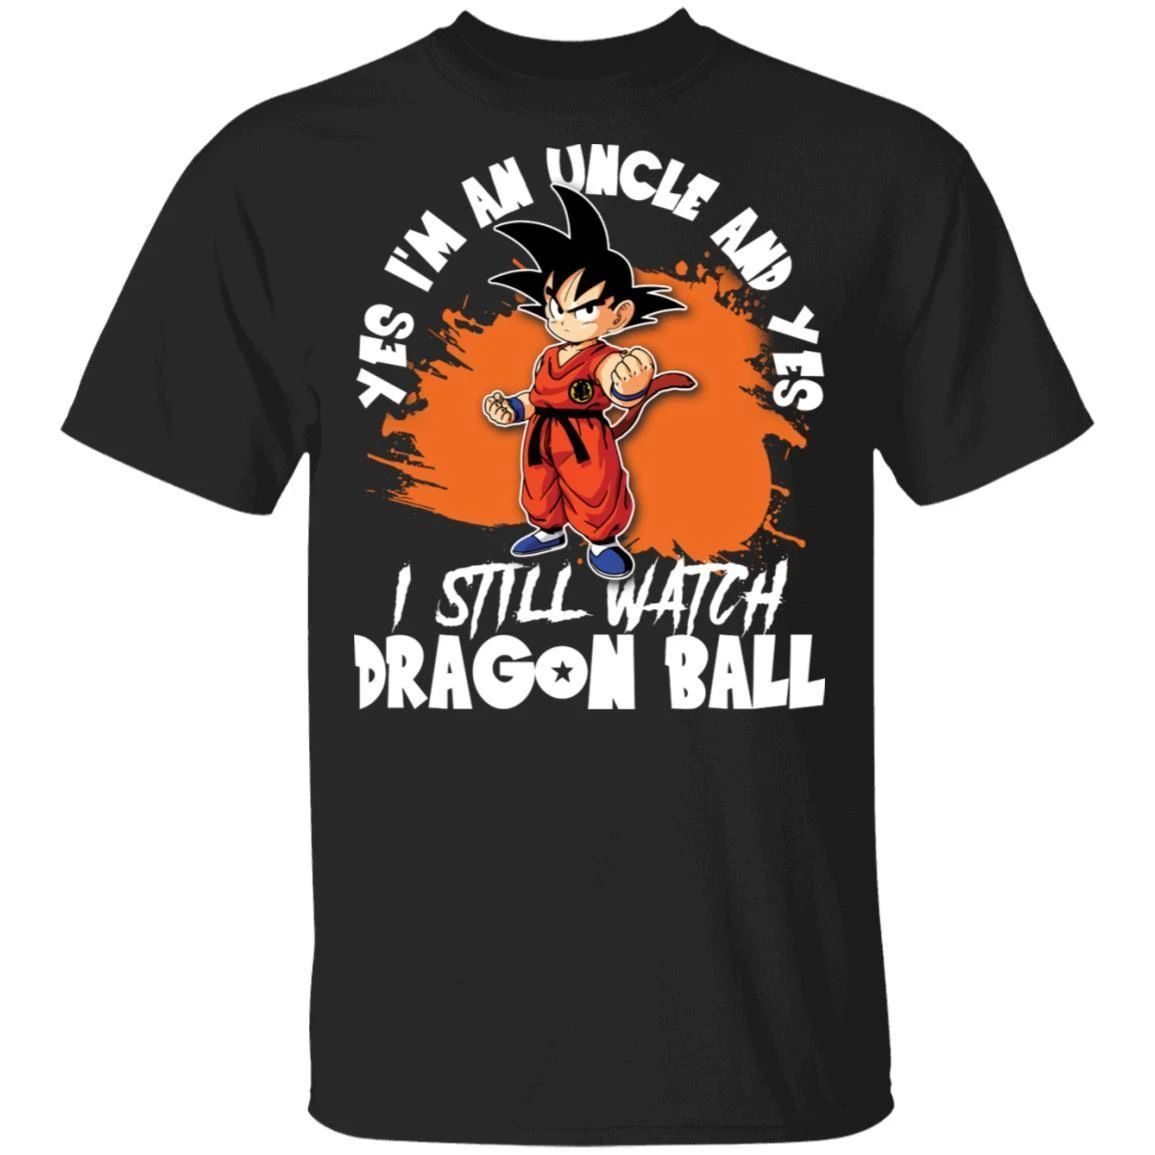 Yes I’m An Uncle And Yes I Still Watch Dragon Ball Shirt Son Goku Tee